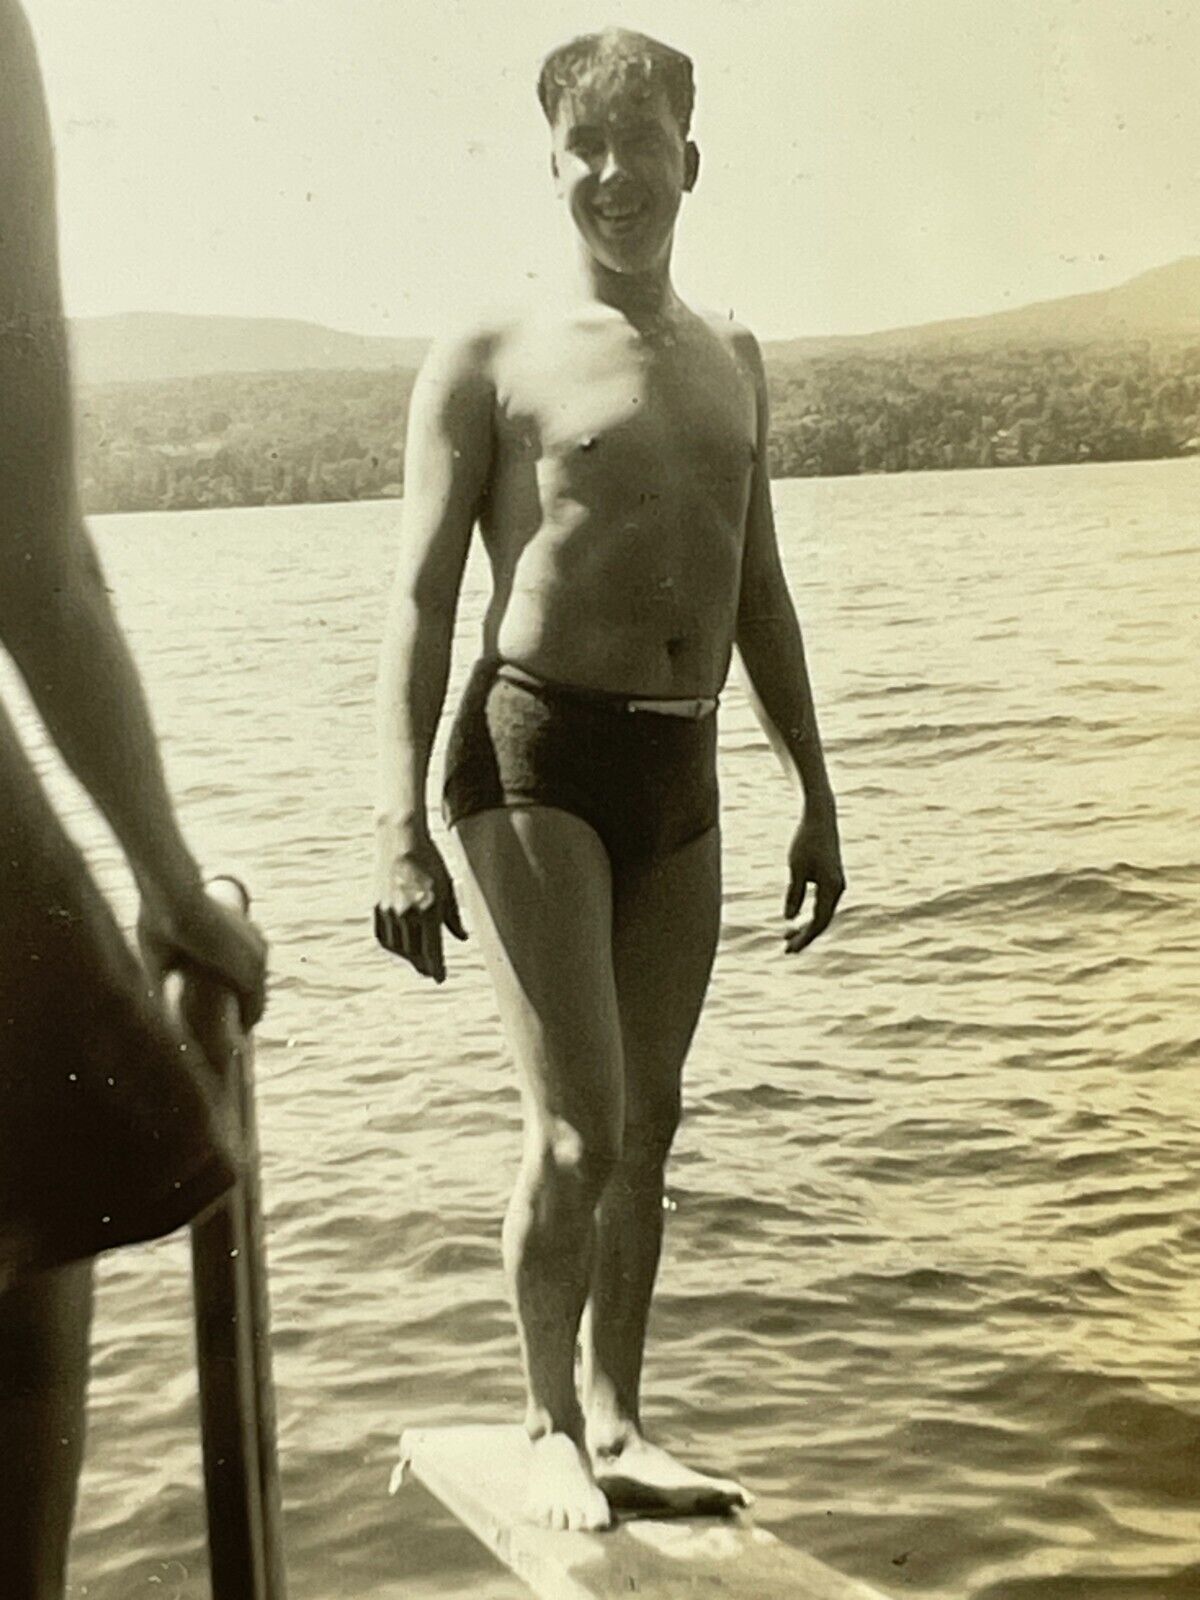 XH Photograph Handsome Man Standing On Wood Plank Bathing Suit Lake Cute